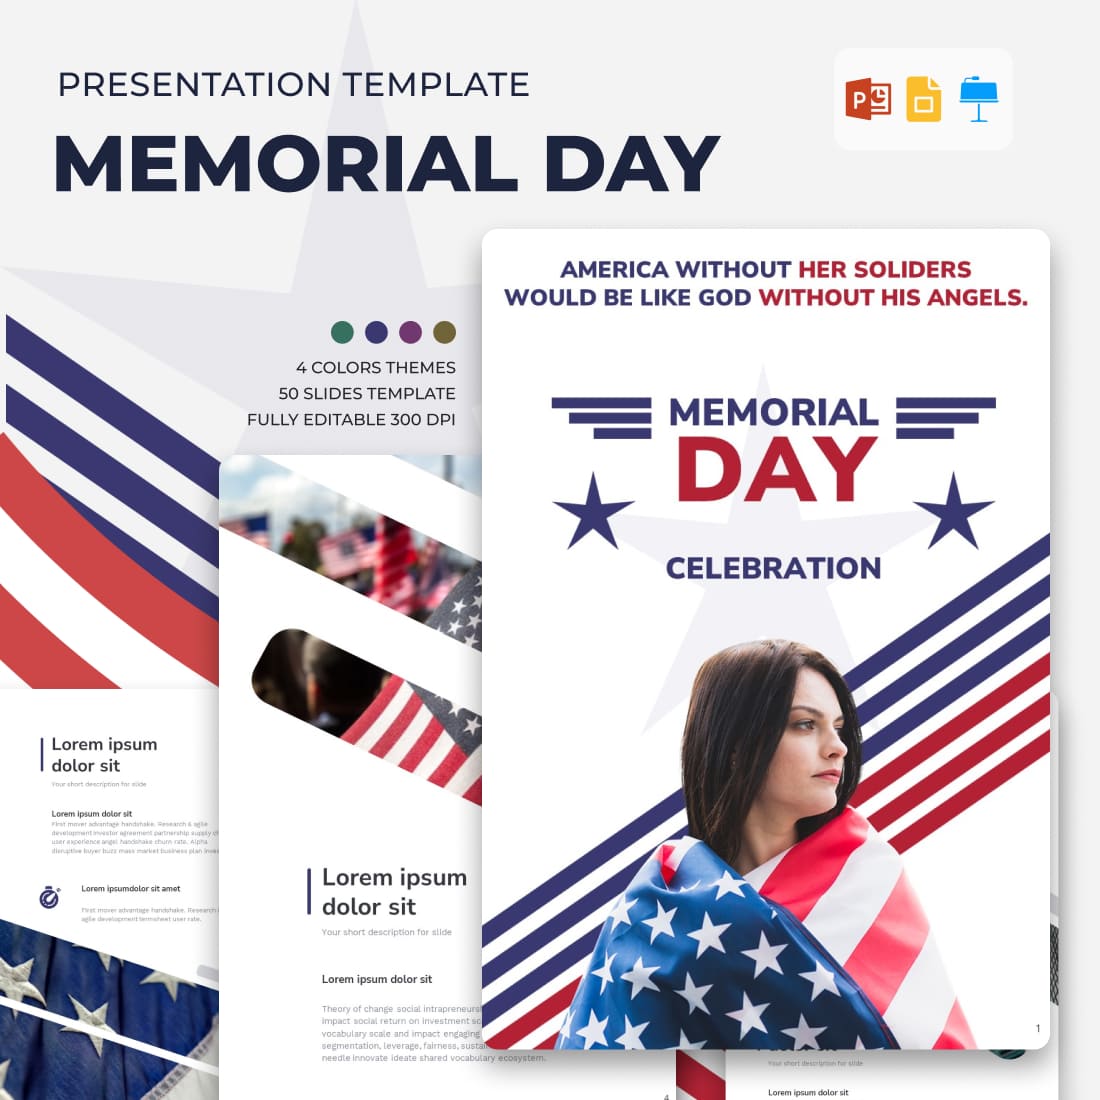 Memorialday presentation template, first picture 1100x1100.